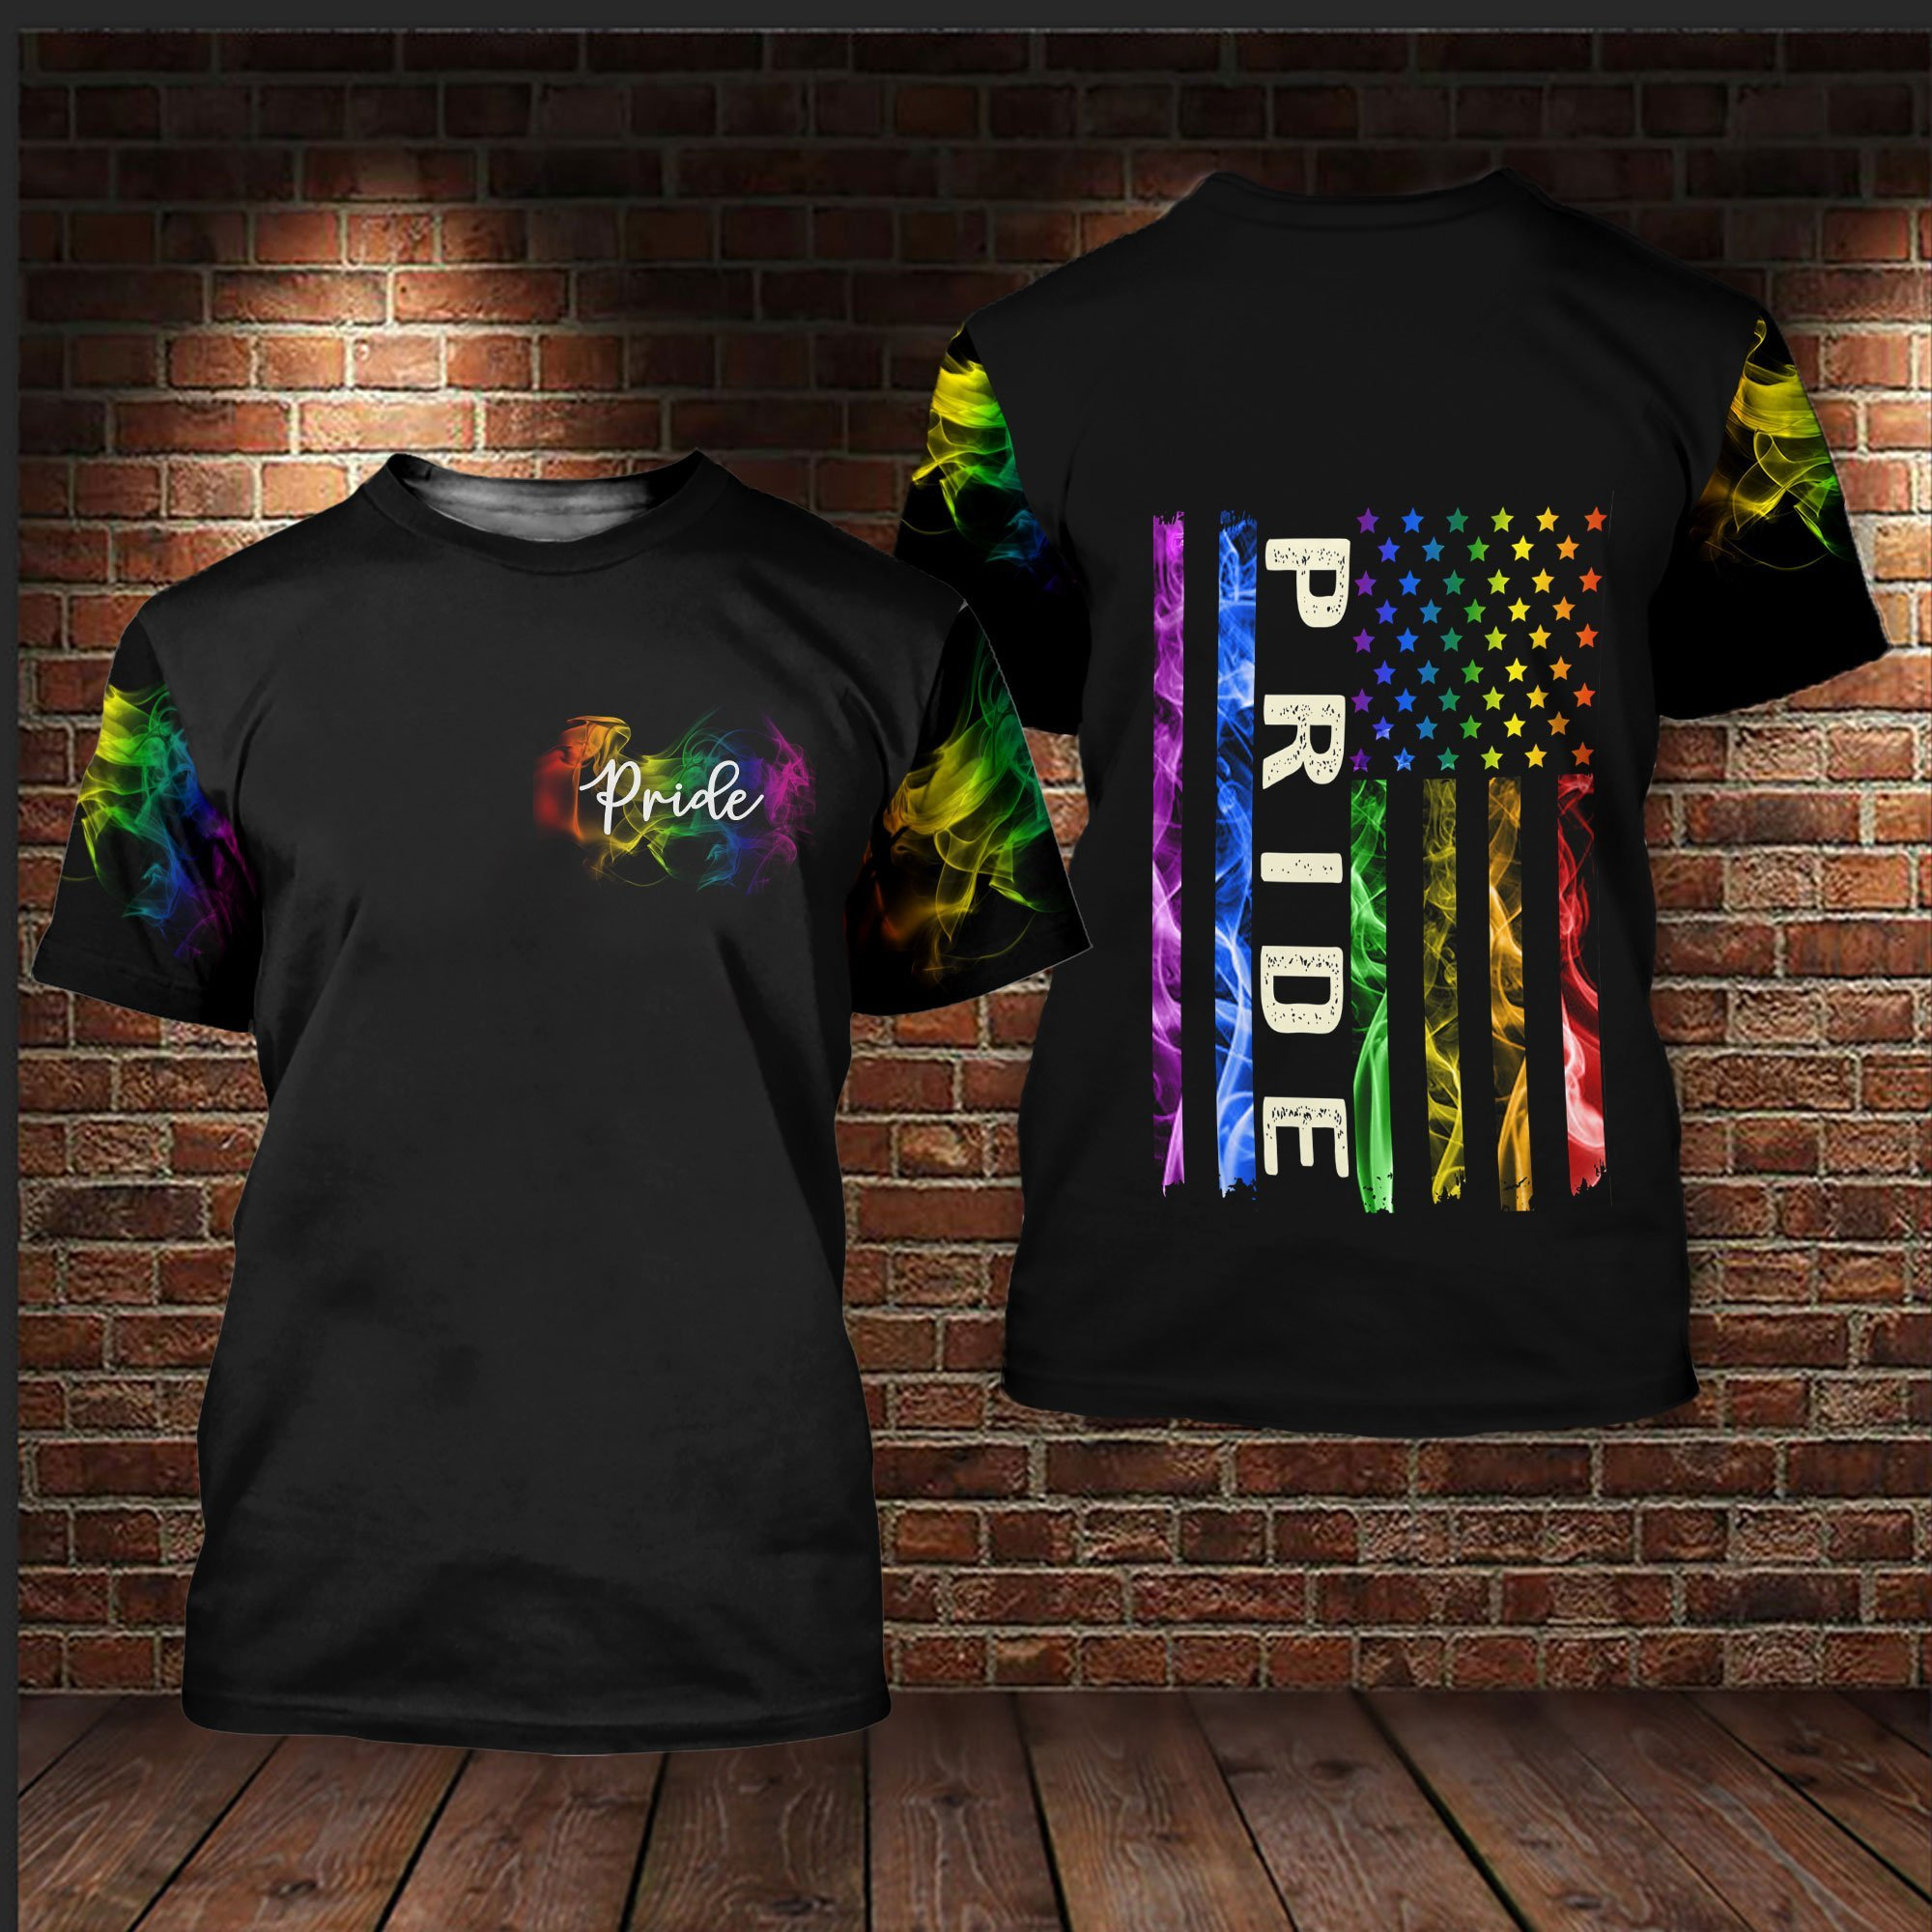 LGBT Pride Smoke Vintage 3D All Over Printed Shirts For LGBT Community/ Gift For Gay Man